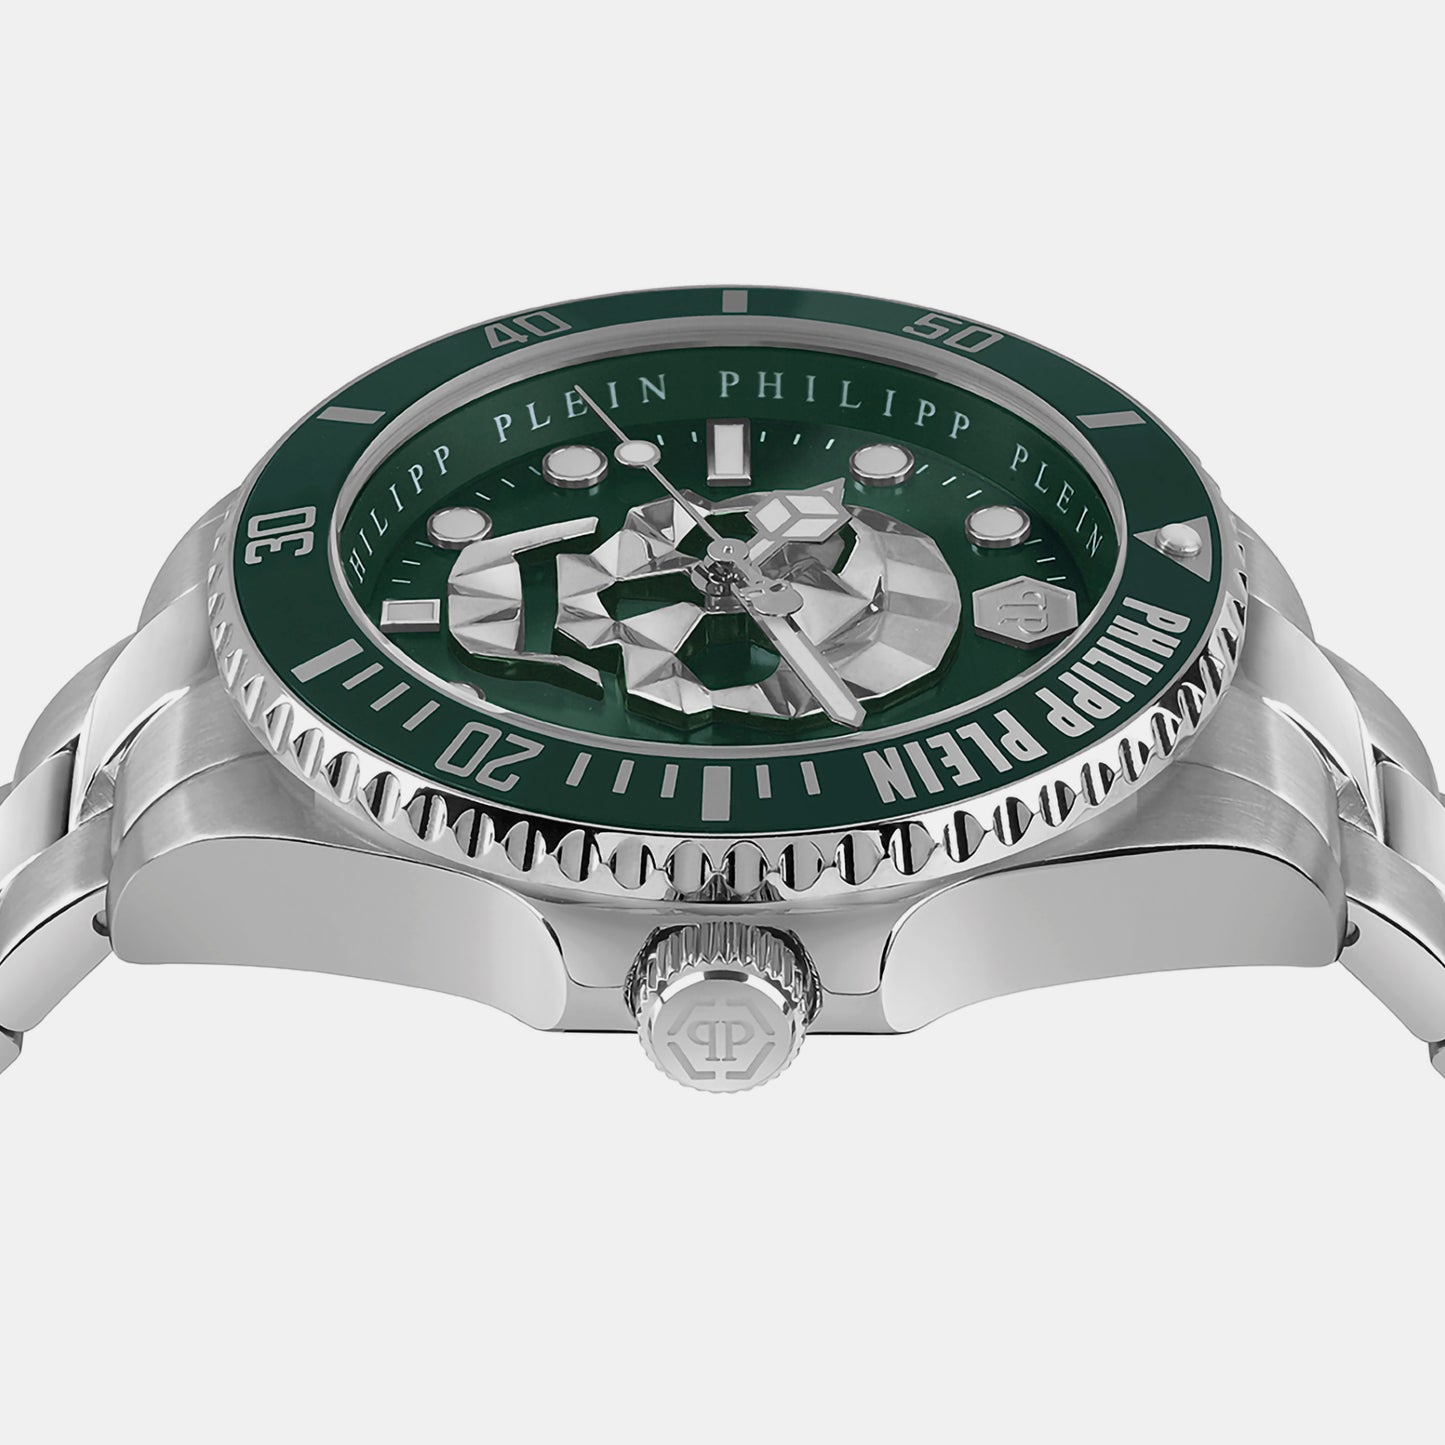 The $Kull Diver Male Green Analog Stainless Steel Watch PWOAA0622